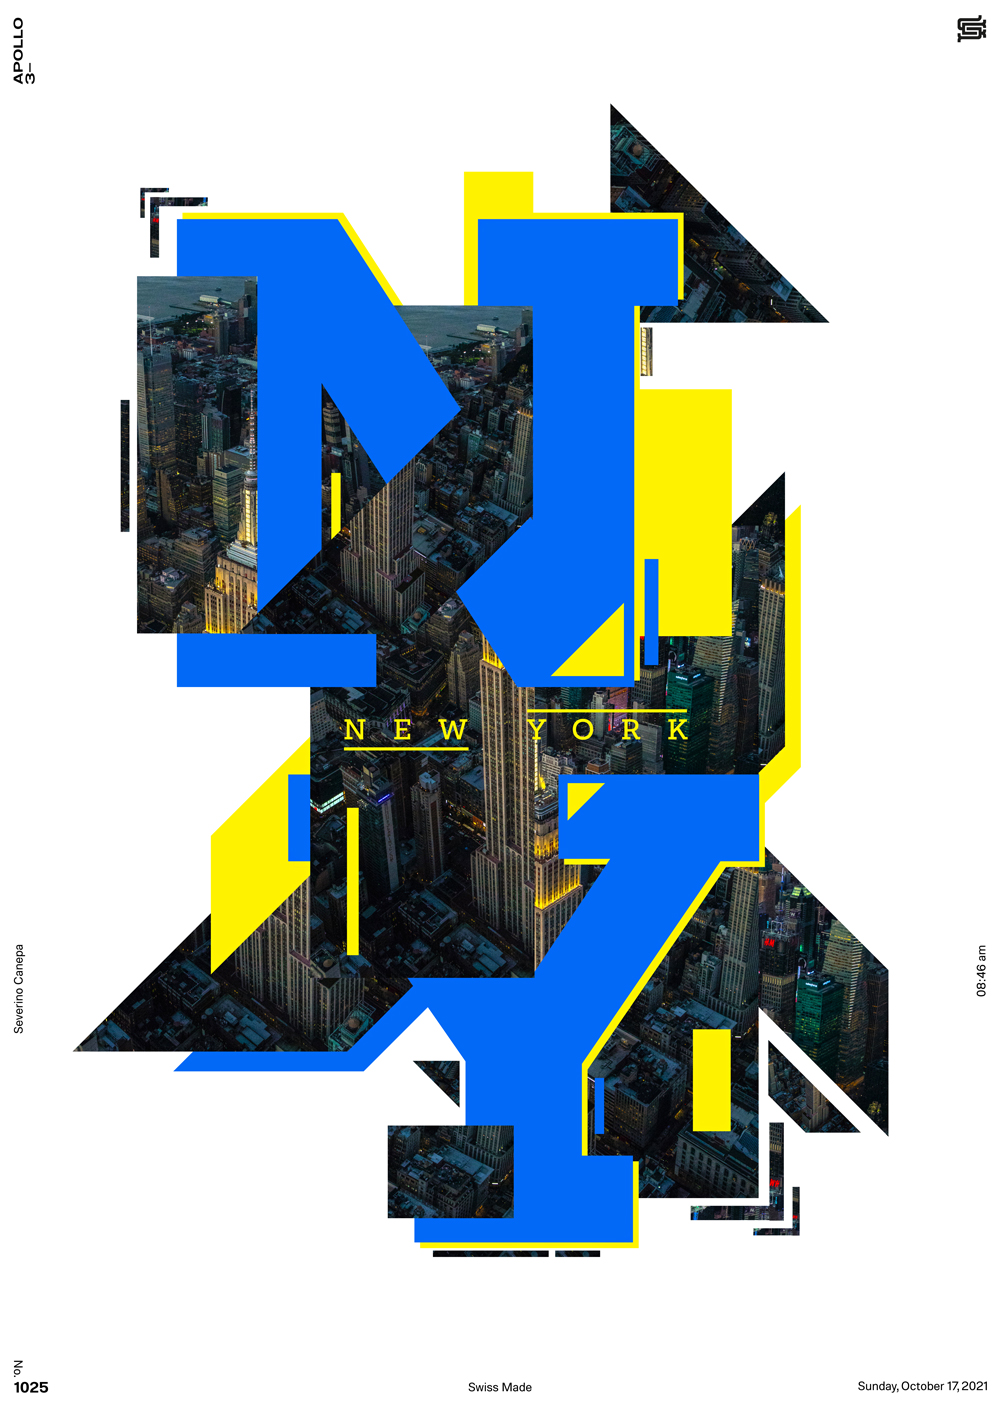 Digital creation I made with the picture of New York building, shapes, and typography